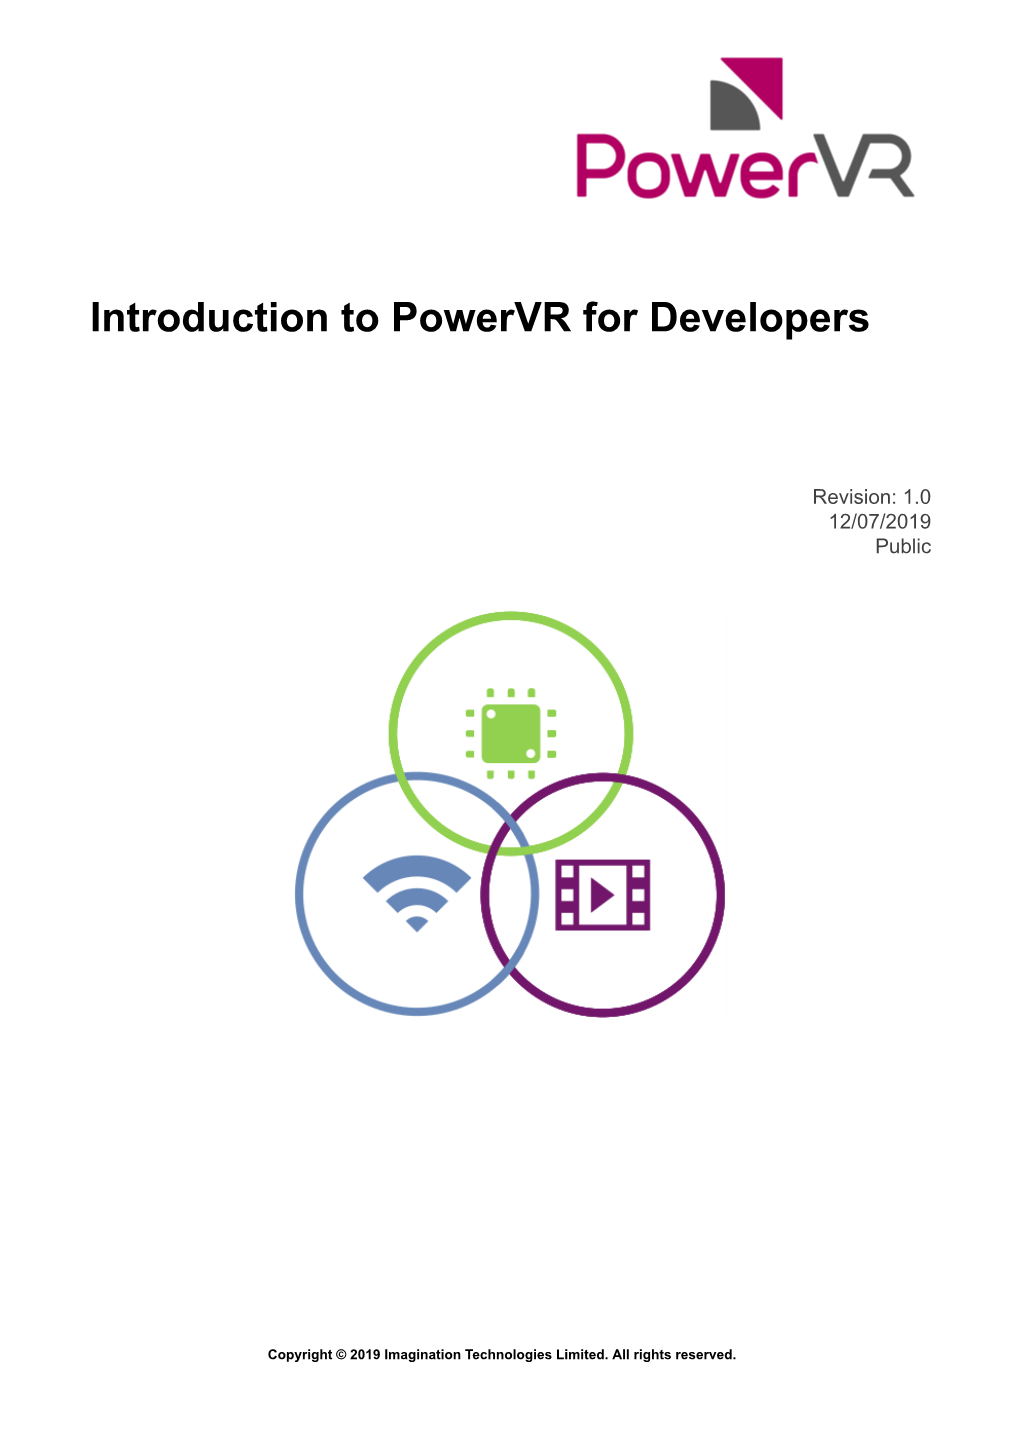 Introduction to Powervr for Developers